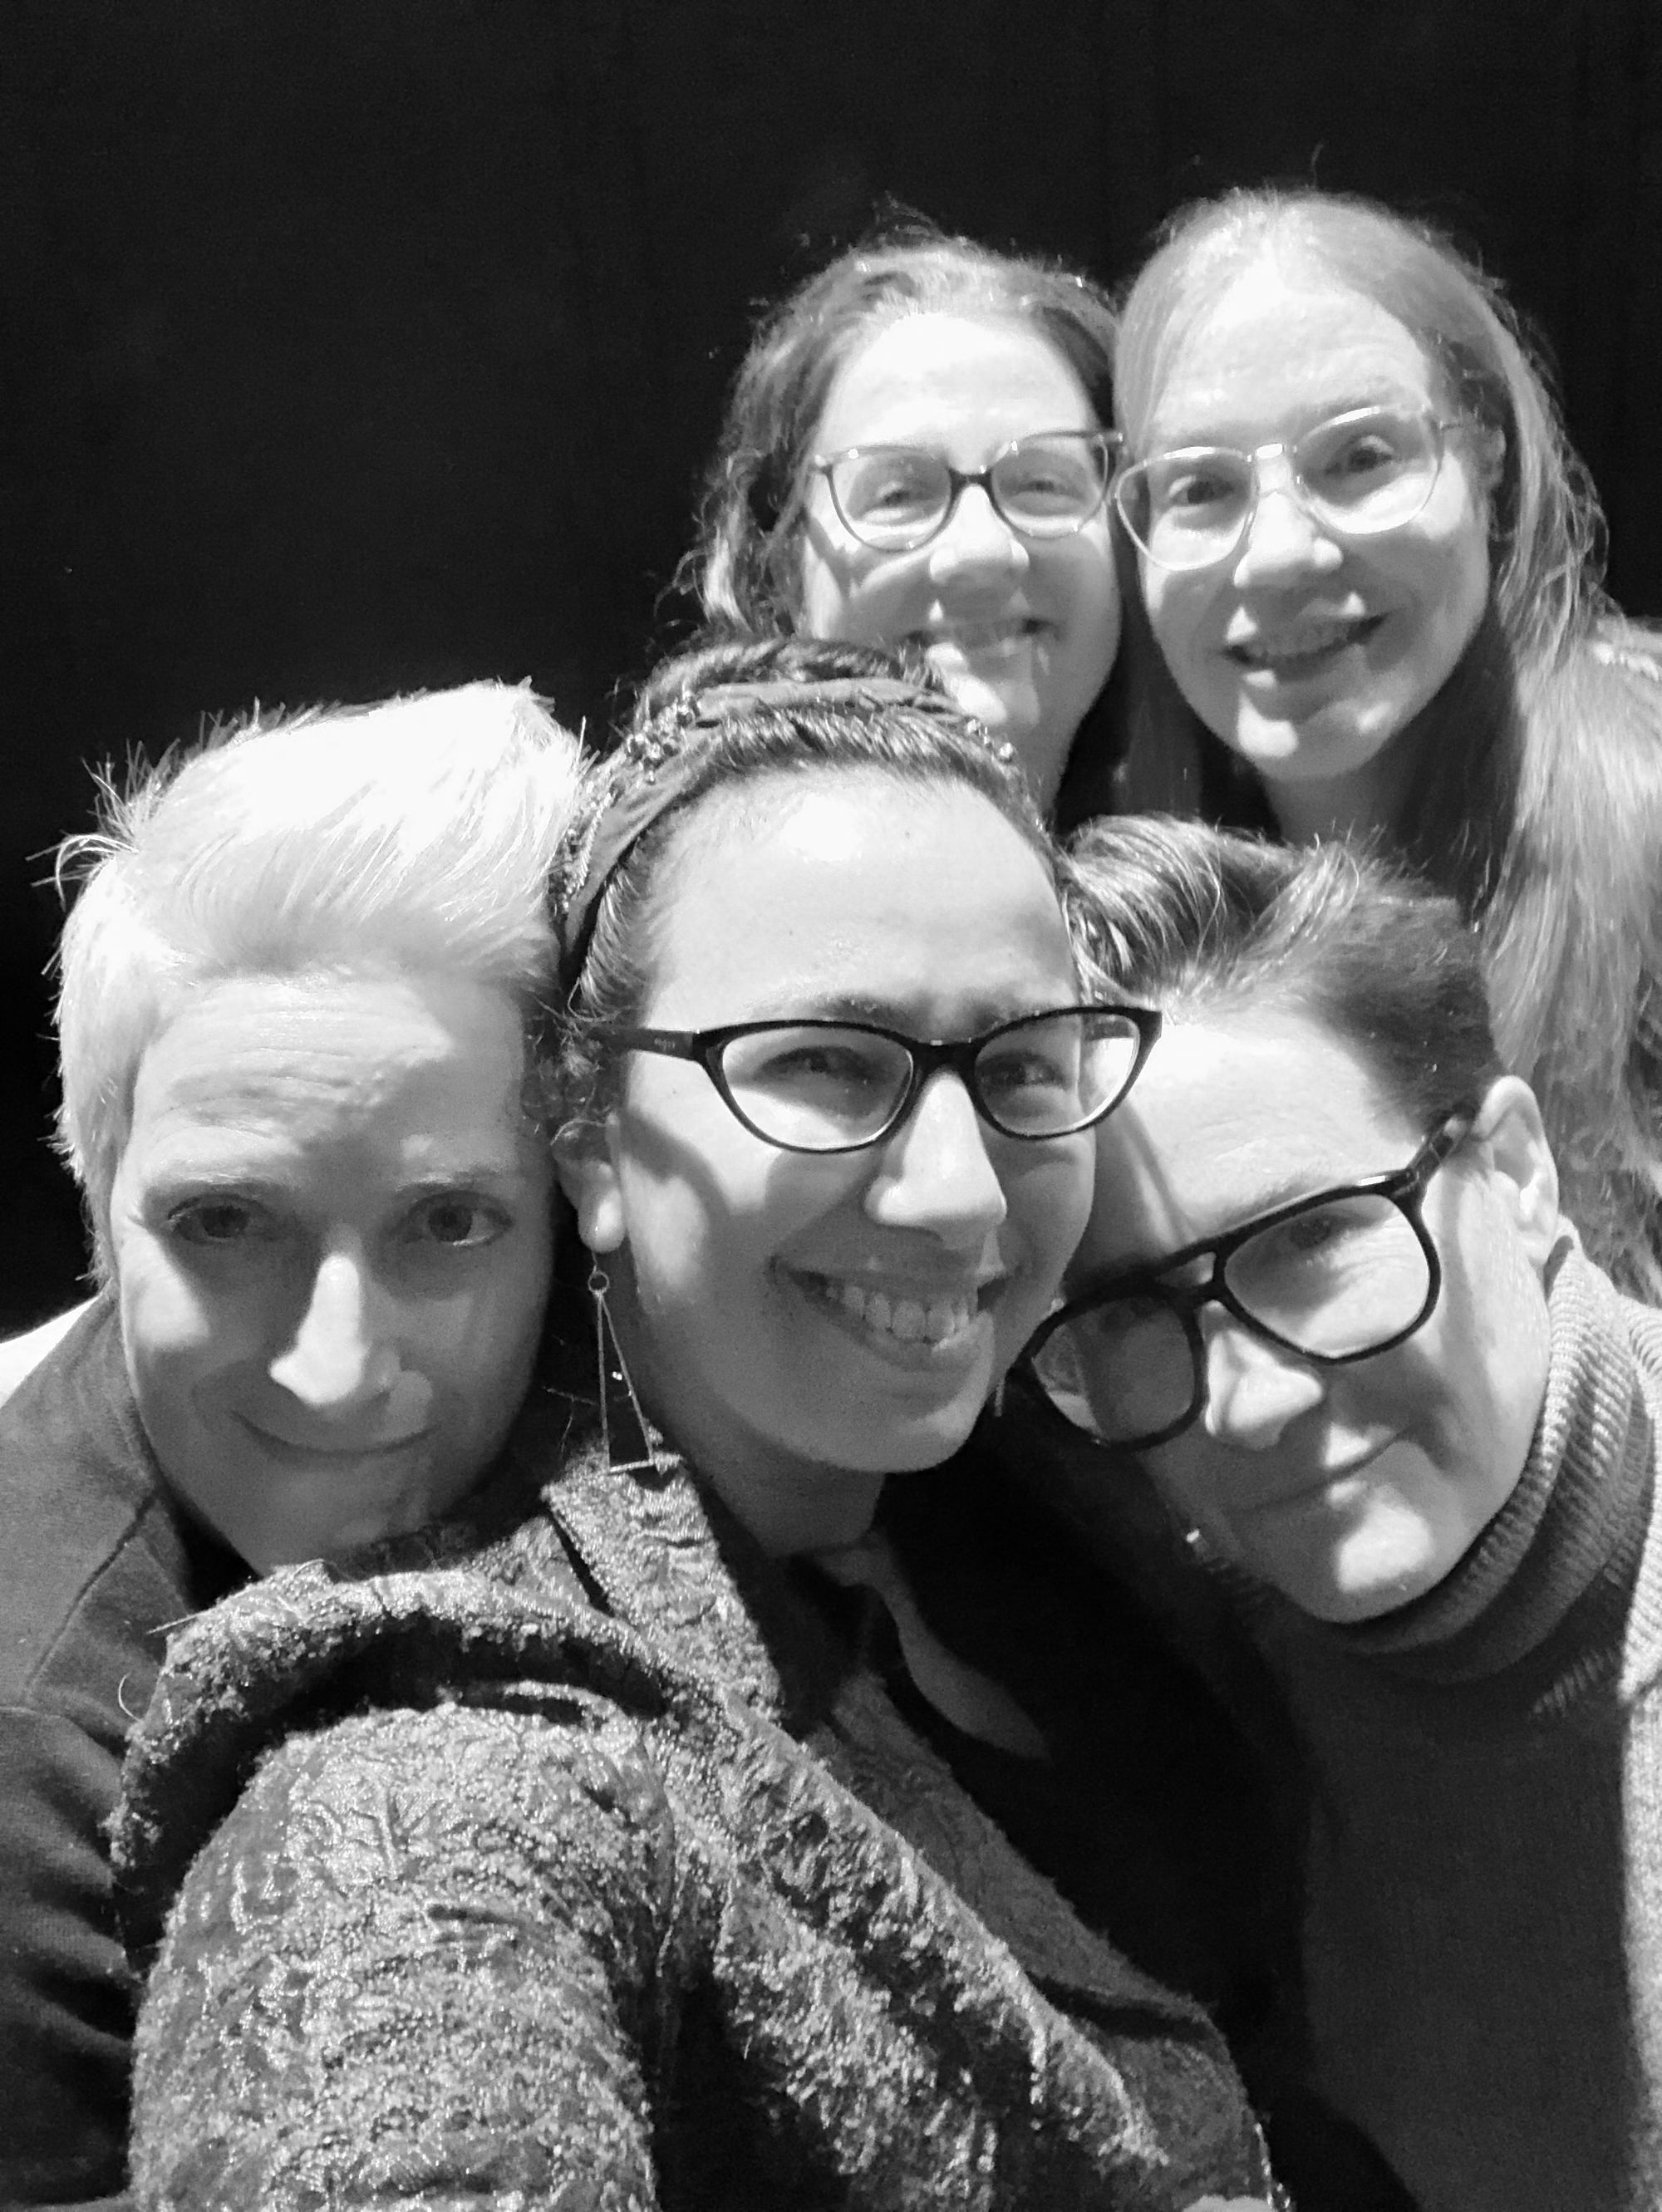 Selfie with my friends, in black and white. Clockwise from left: Margo MacDonald, me, A. M. Dellamonica, Kelly Robson, V. W. Titus 